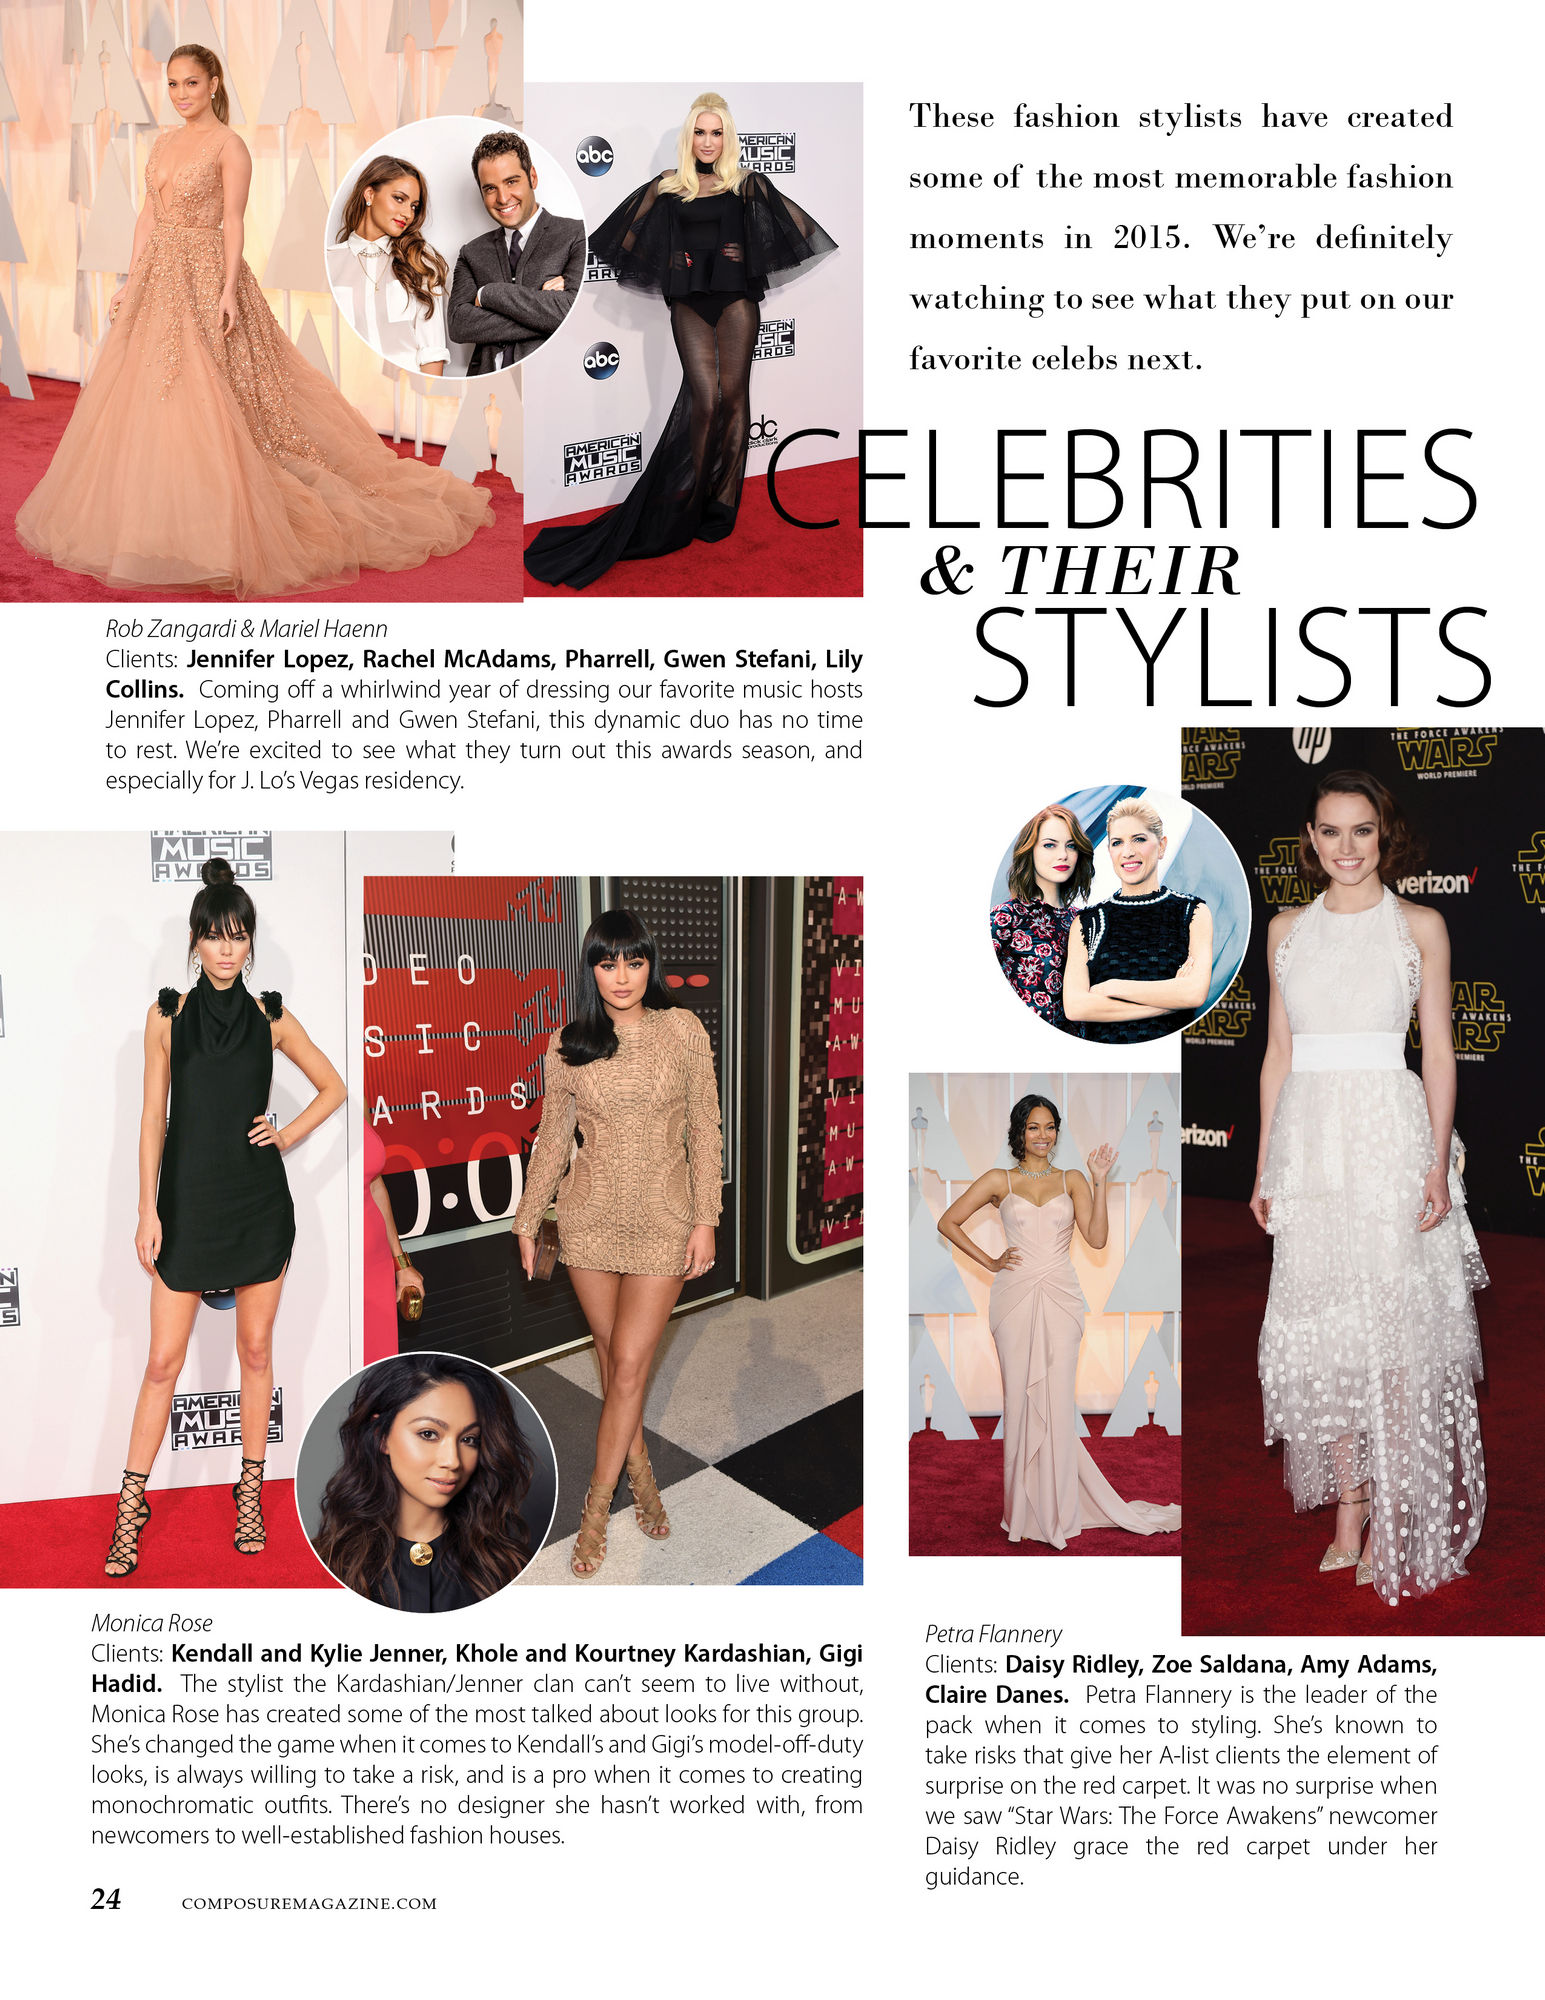 Celebrities and their Stylists